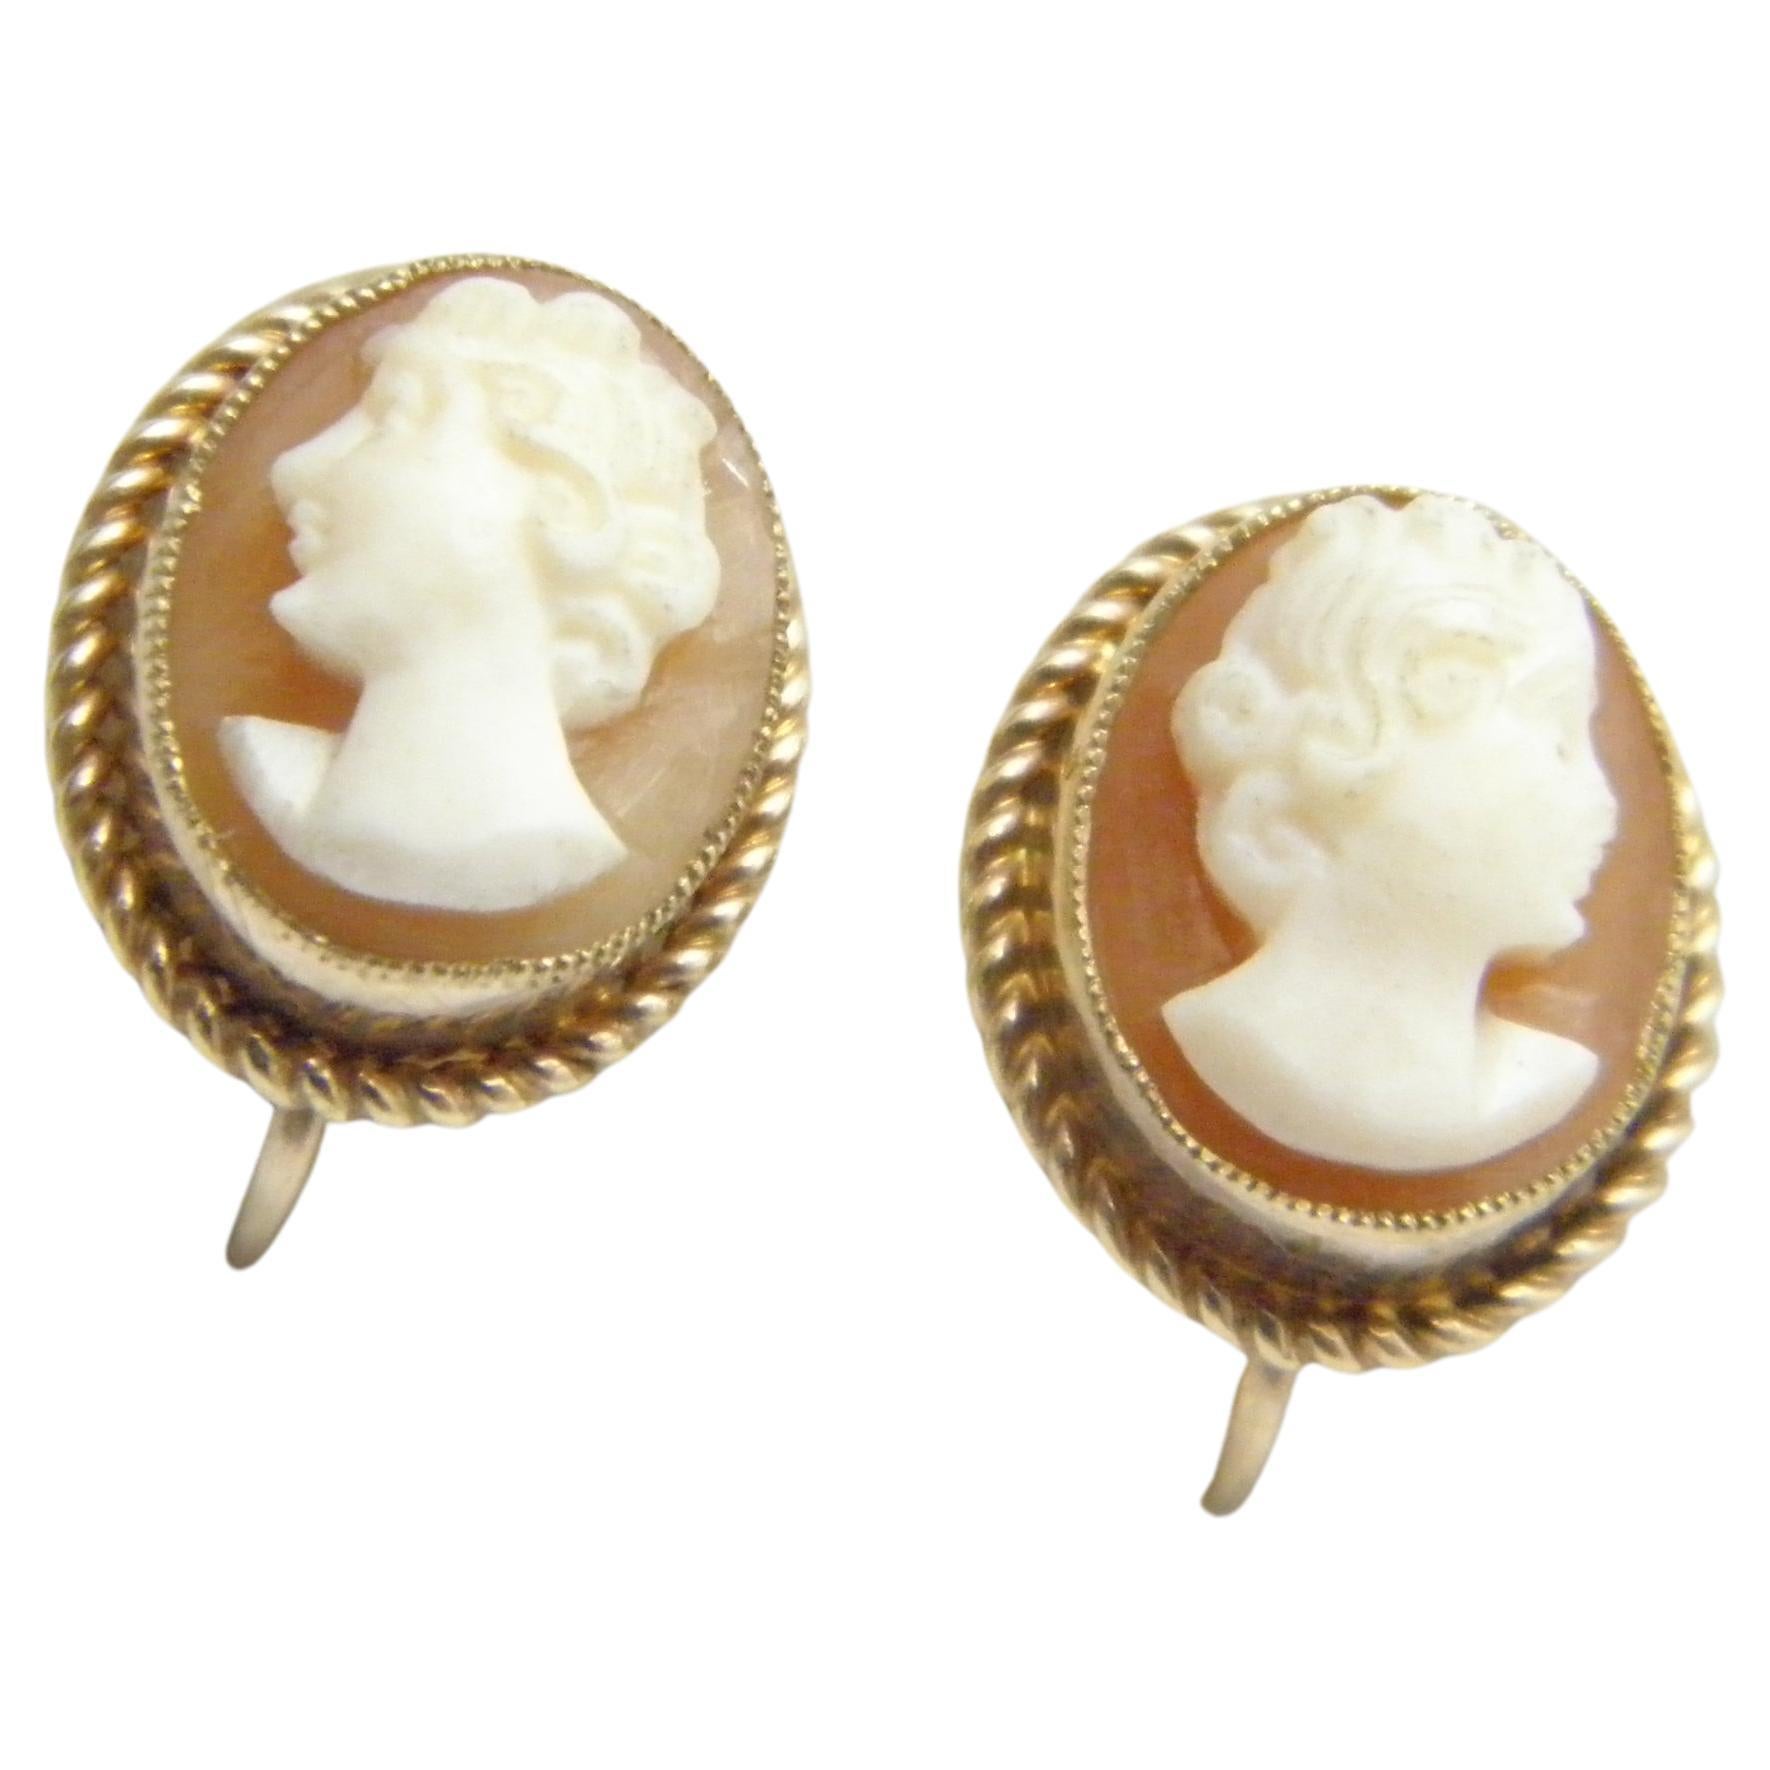 14k Gold Estate Vintage Cameo Earrings Yellow Face Victorian Style Unknown Age 